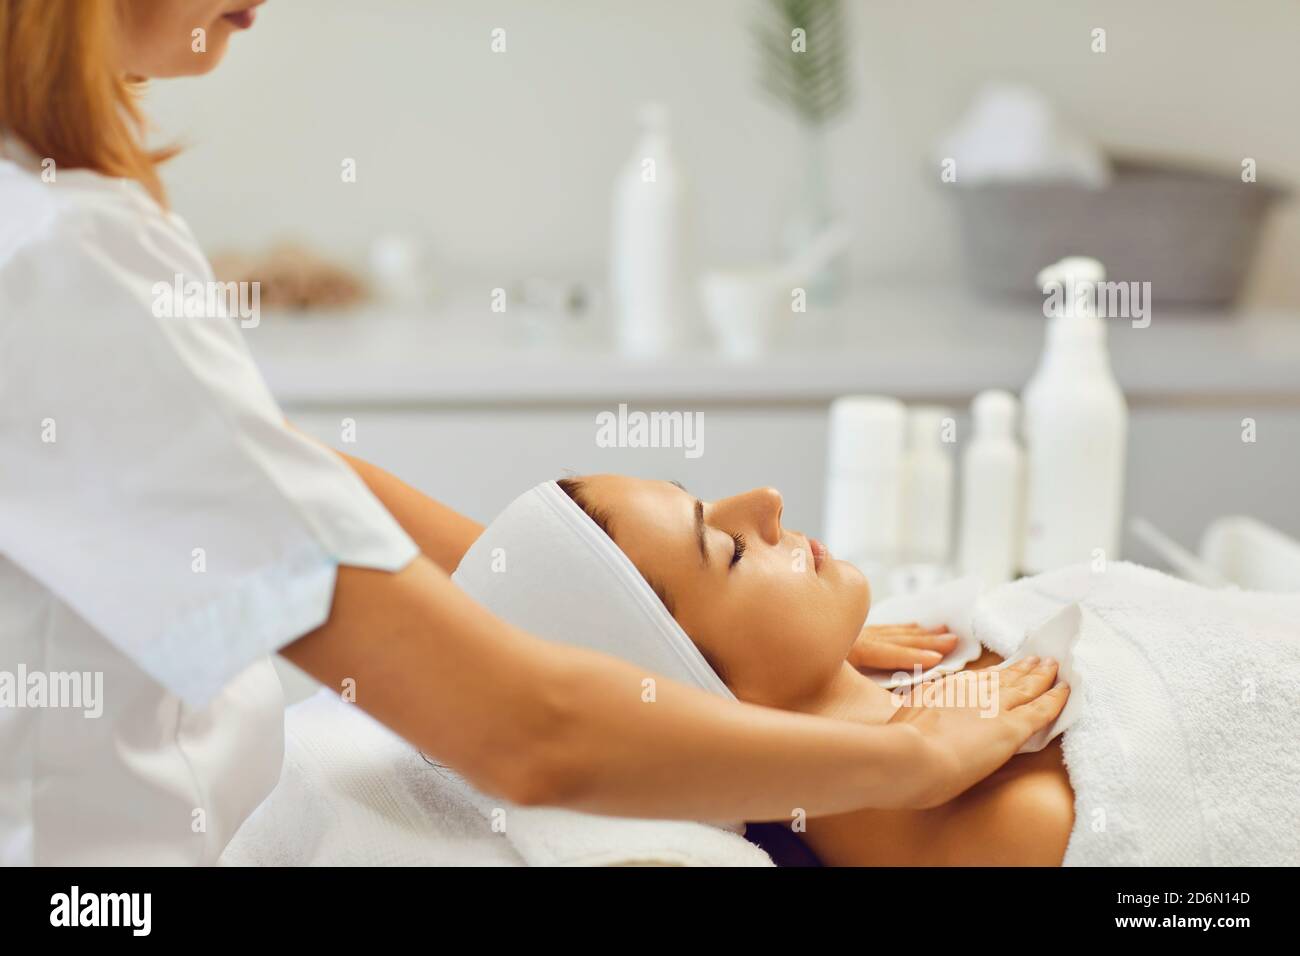 https://c8.alamy.com/comp/2D6N14D/cosmetologist-wiping-relaxing-womans-neck-and-shoulders-after-facial-massage-in-spa-salon-2D6N14D.jpg